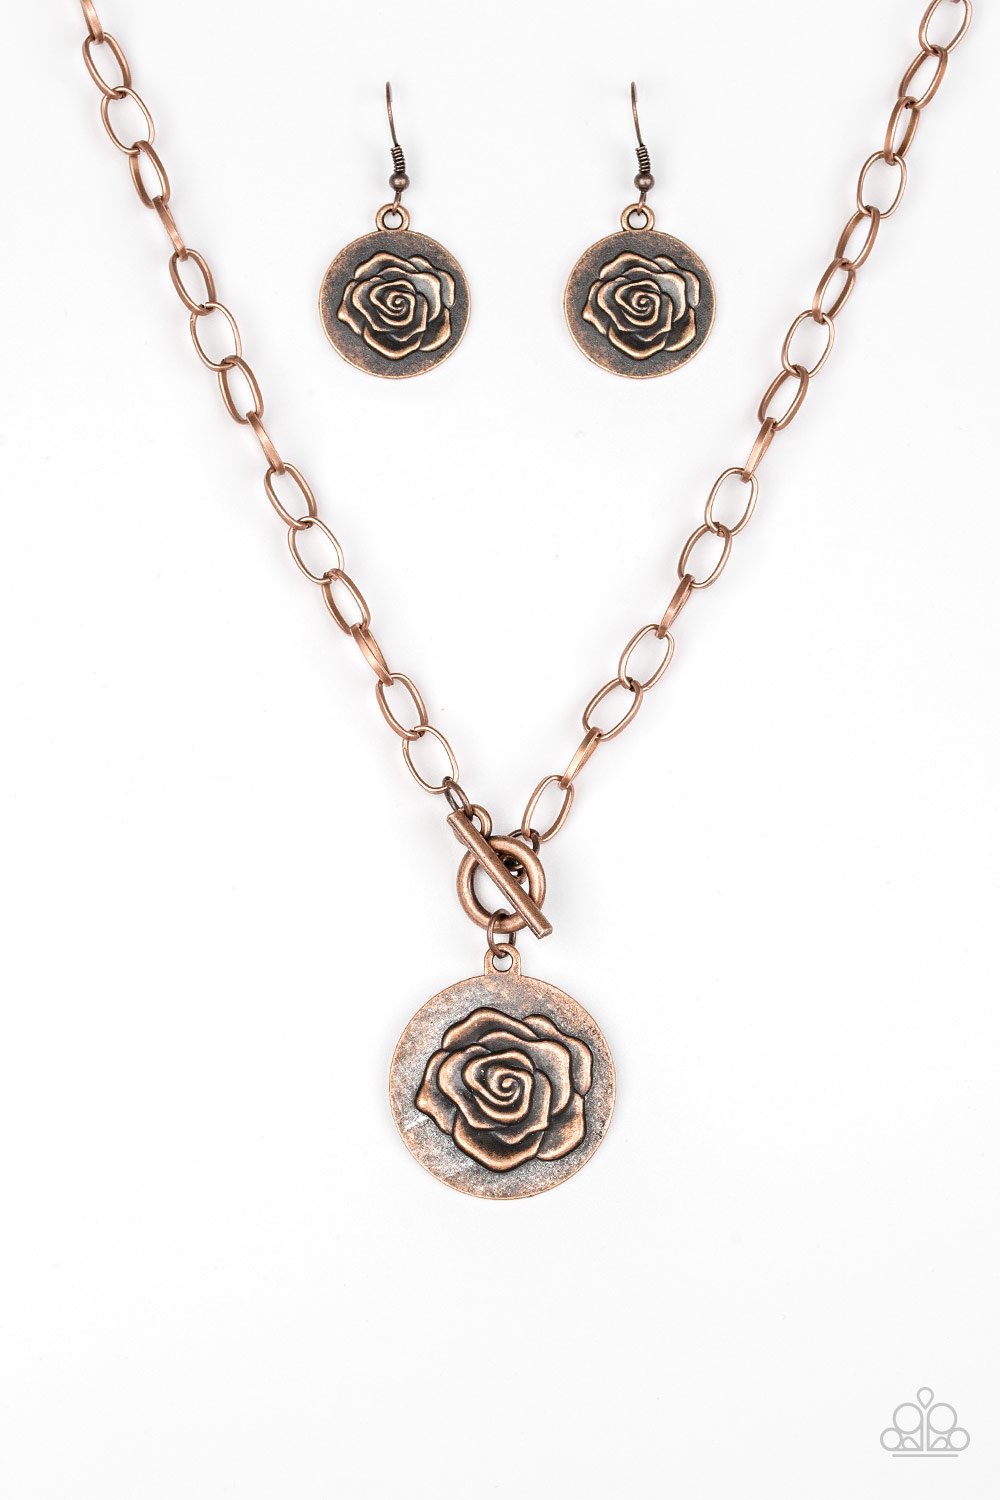 Paparazzi Necklace ~ Beautifully Belle - Copper